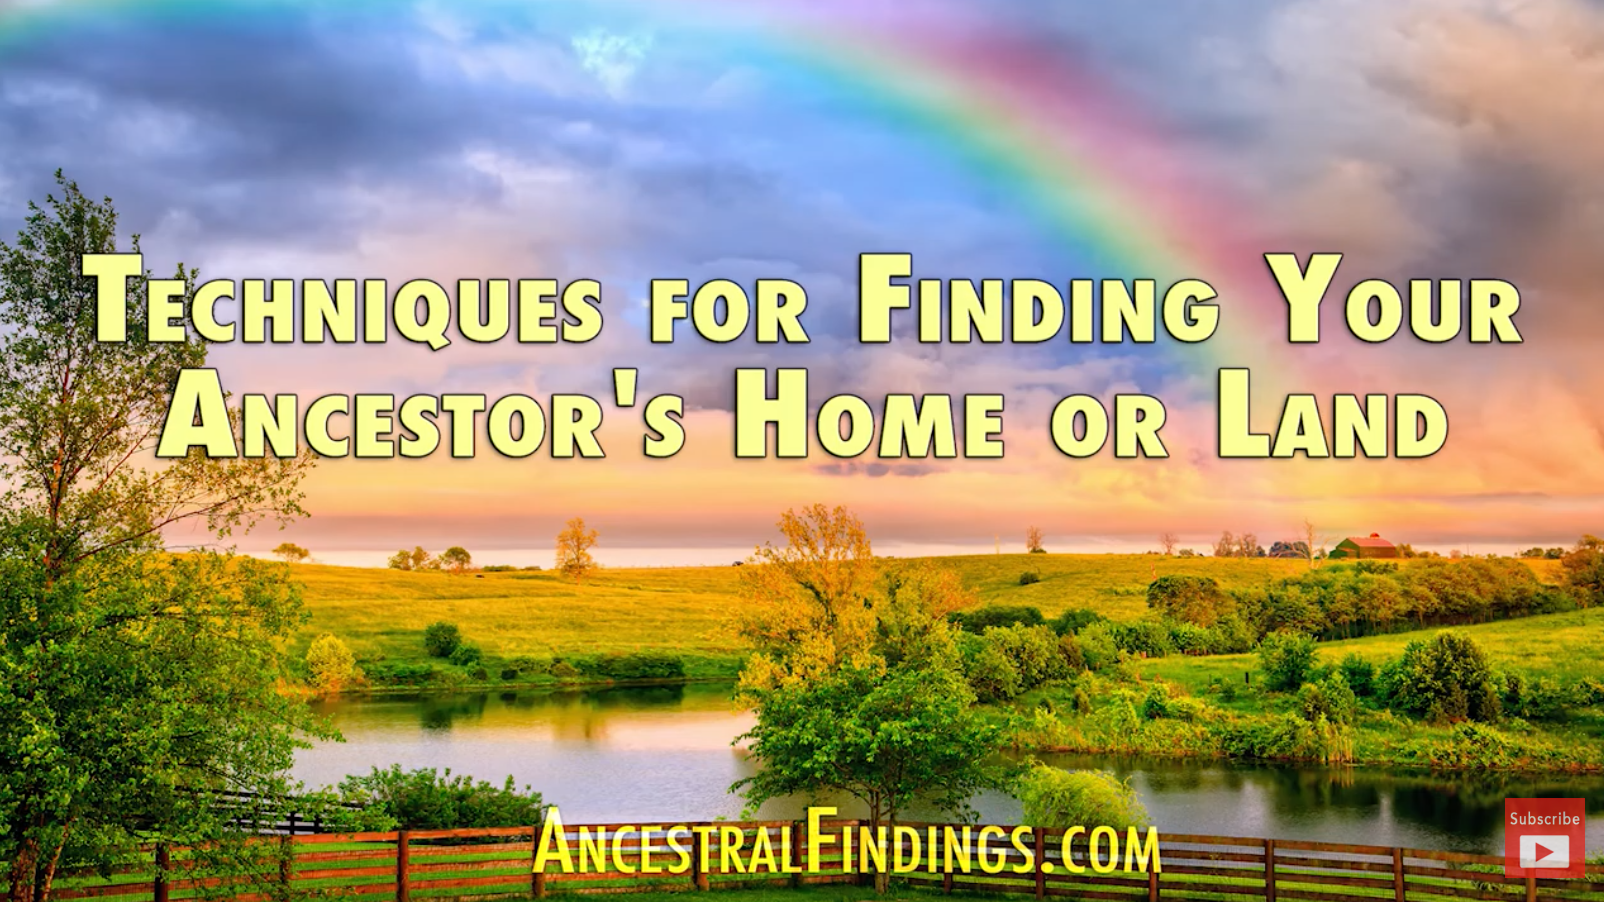 Techniques for Finding Your Ancestor’s Home or Land